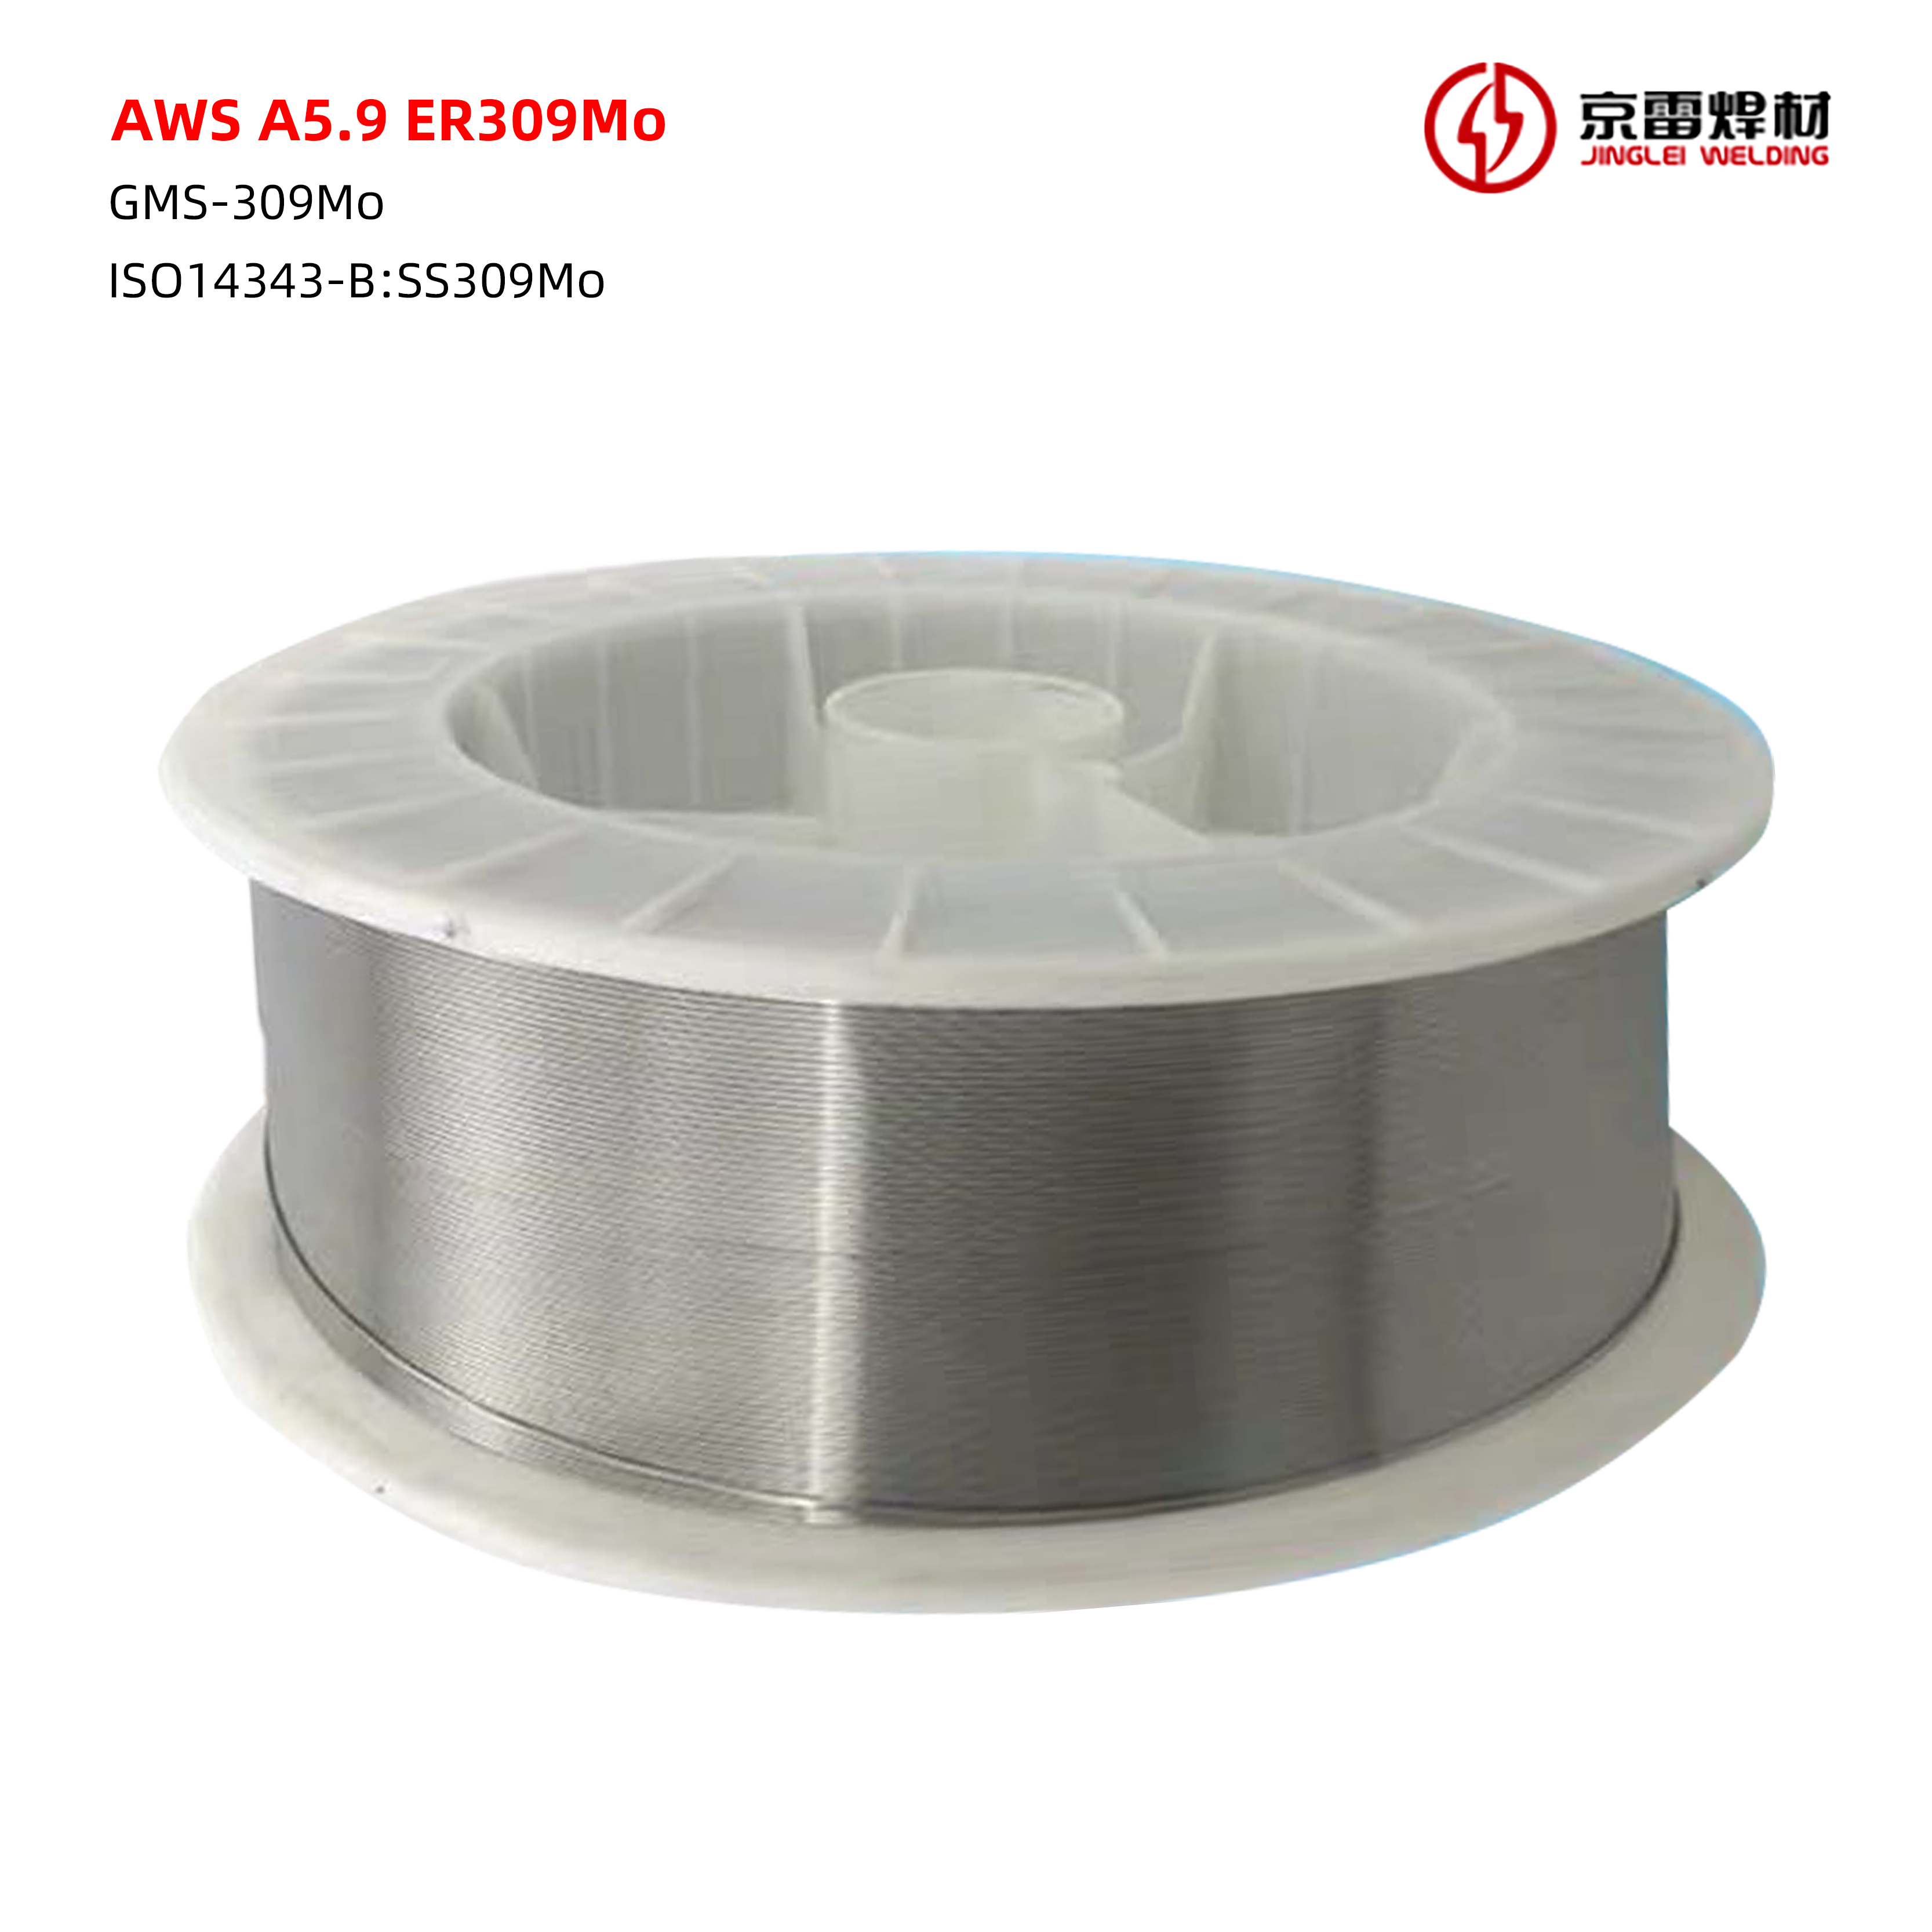 MIG Welding Wire For Stainless Steel ER309Mo petrochemical diesel/crude oil storage tank welding goods